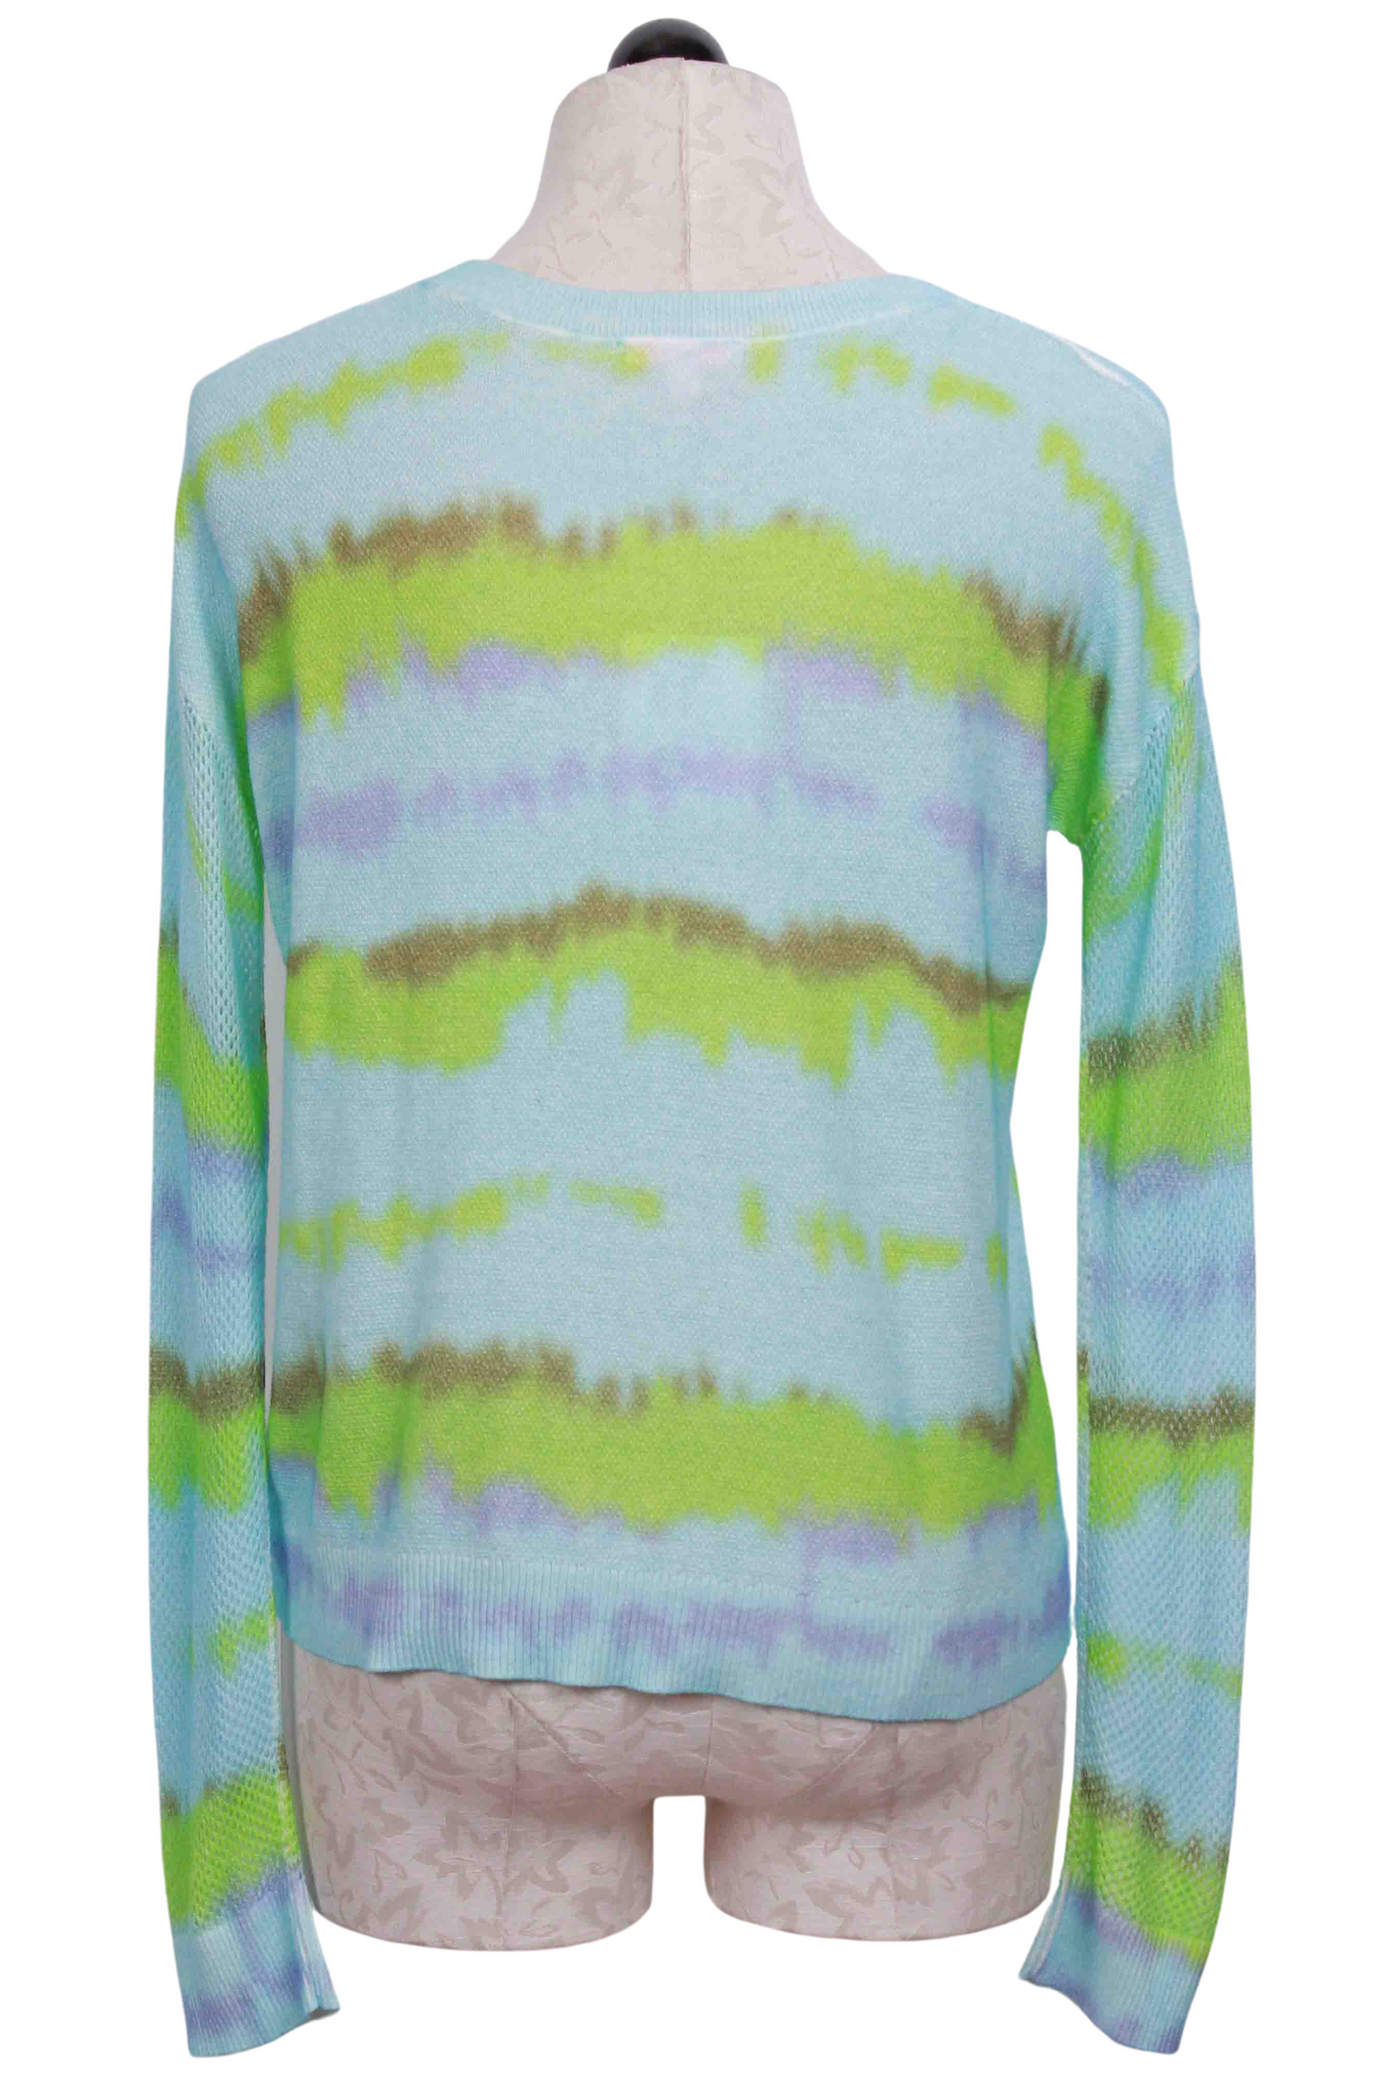 back view of Aqua Combo Color wavy stripe Rise Above Sweater by Lisa Todd